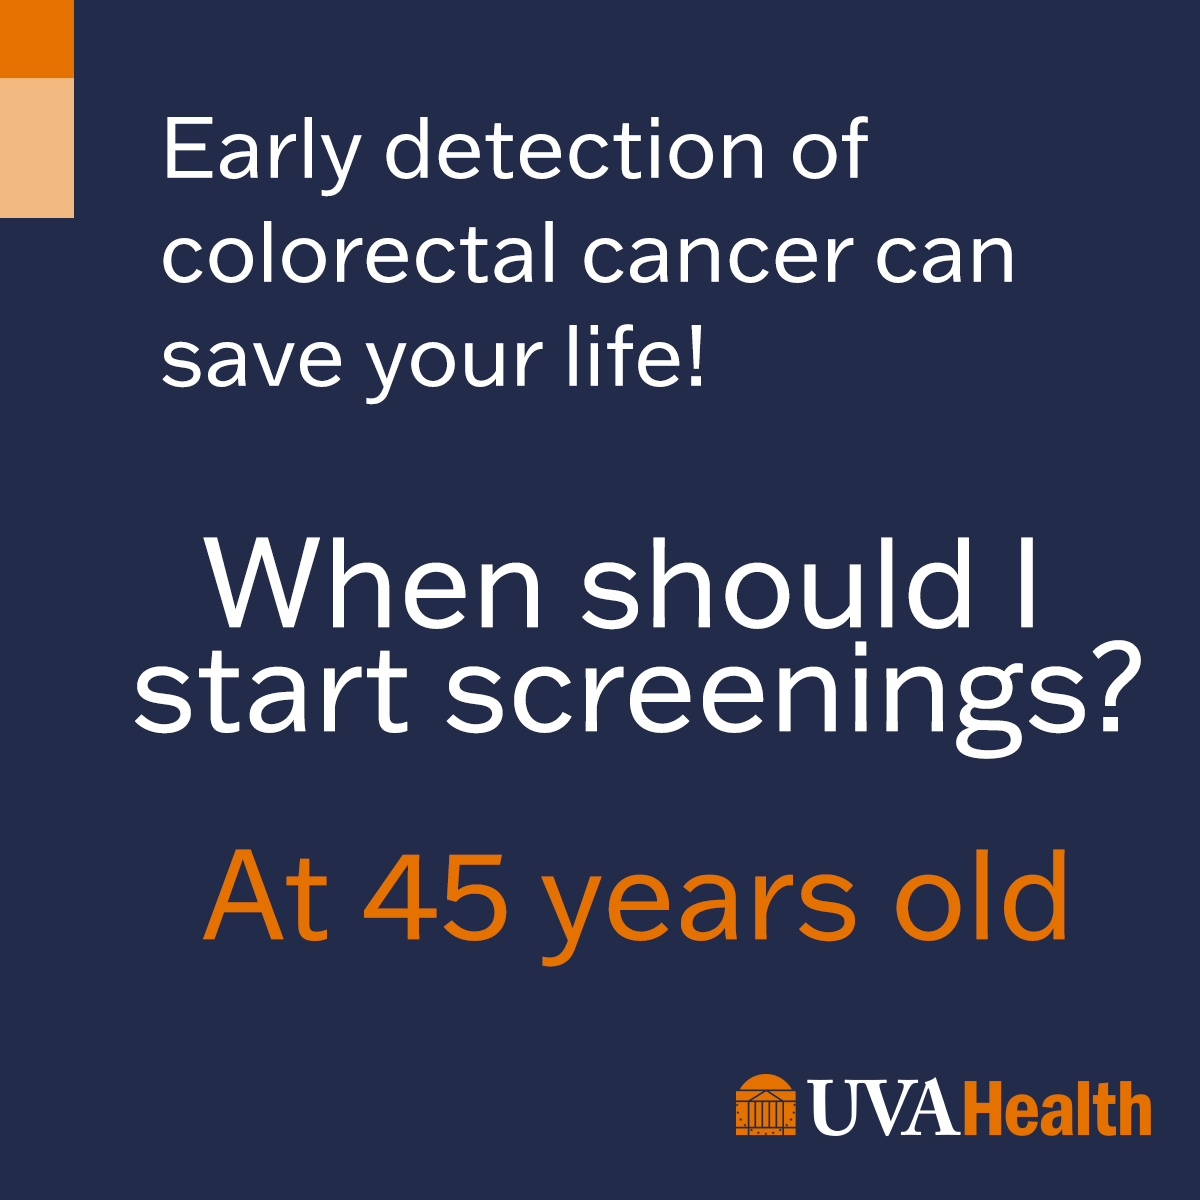 Start colon cancer screening by age 45. You may need to start earlier if you have a higher risk for colon cancer, including family history. Learn more about our screening options: bit.ly/3T4hlbH #ColonCancer